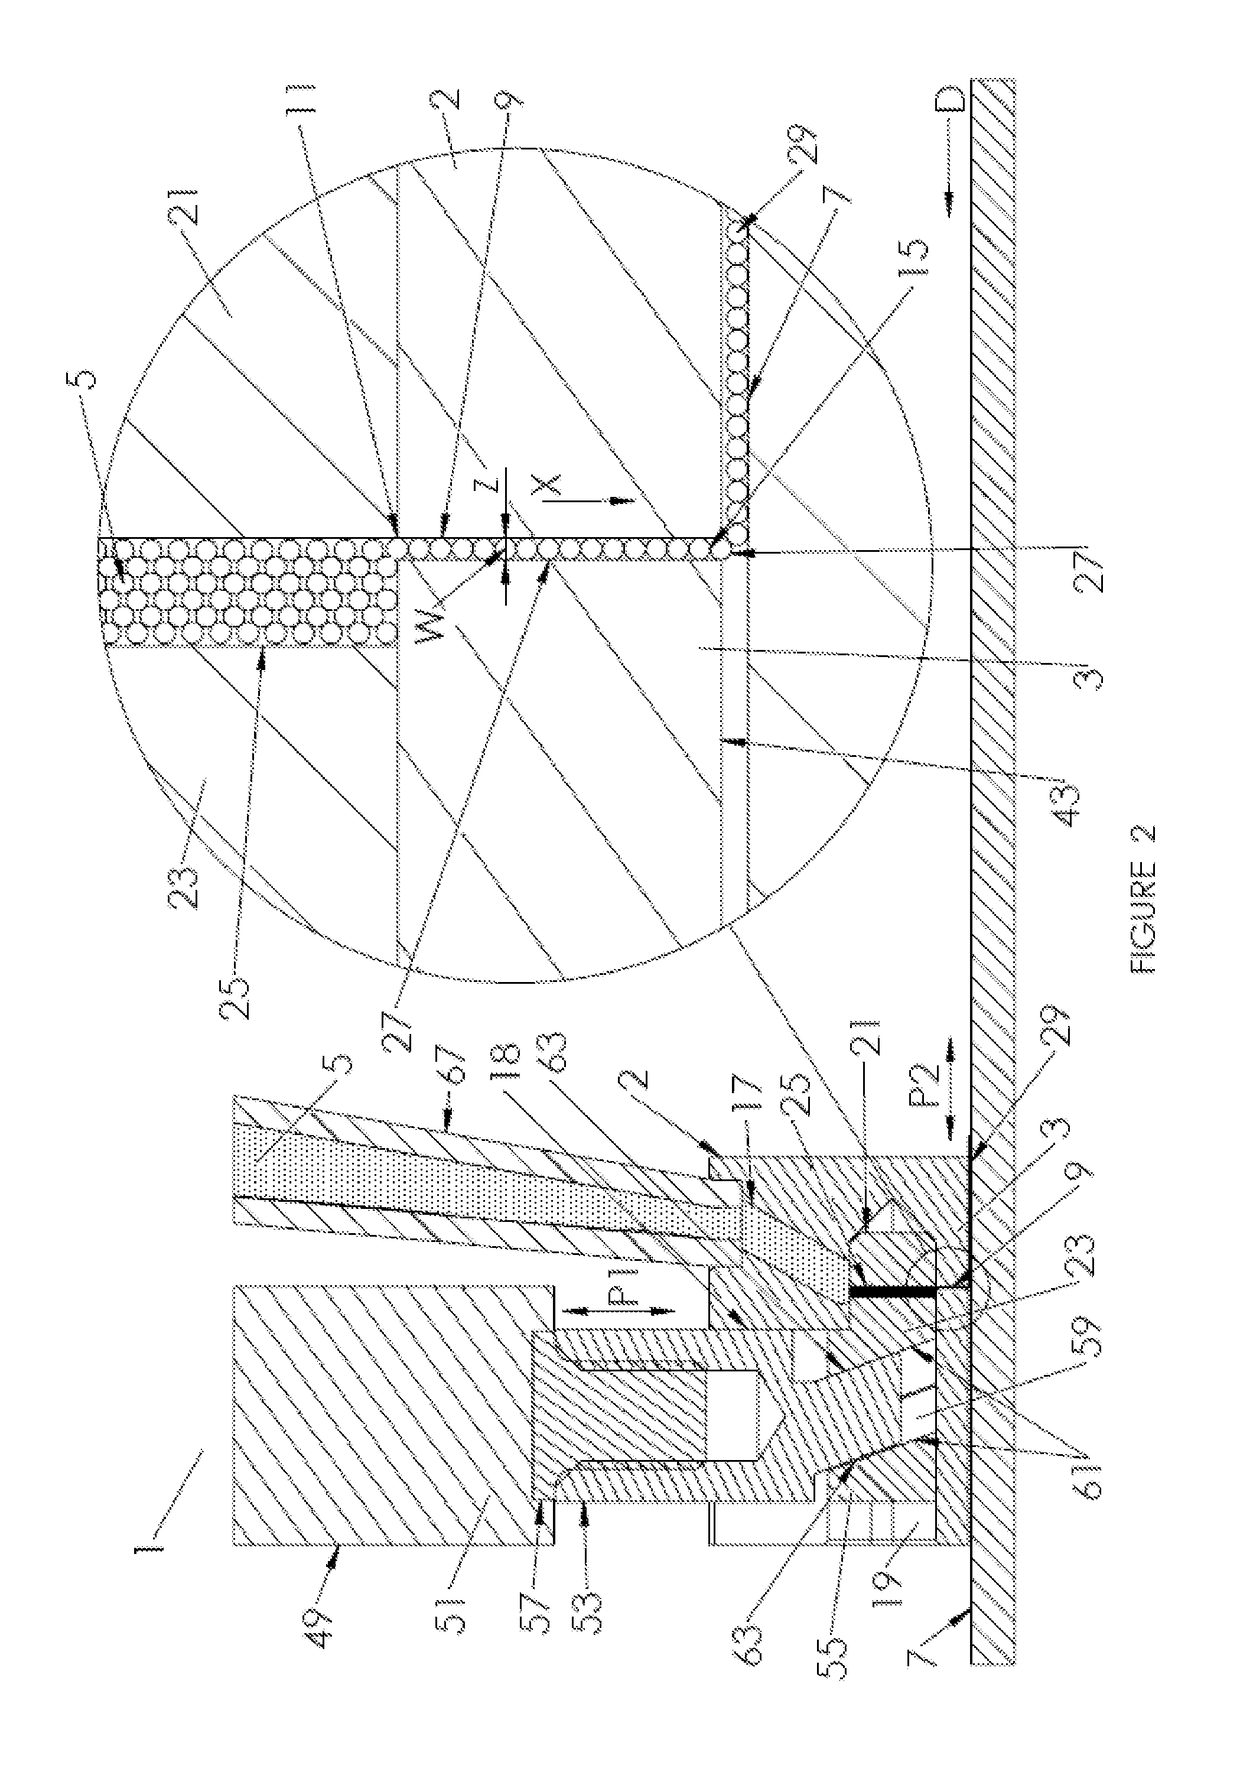 A Three Dimensional Printing Apparatus, a Material Dispensing Unit Therefor and a Method